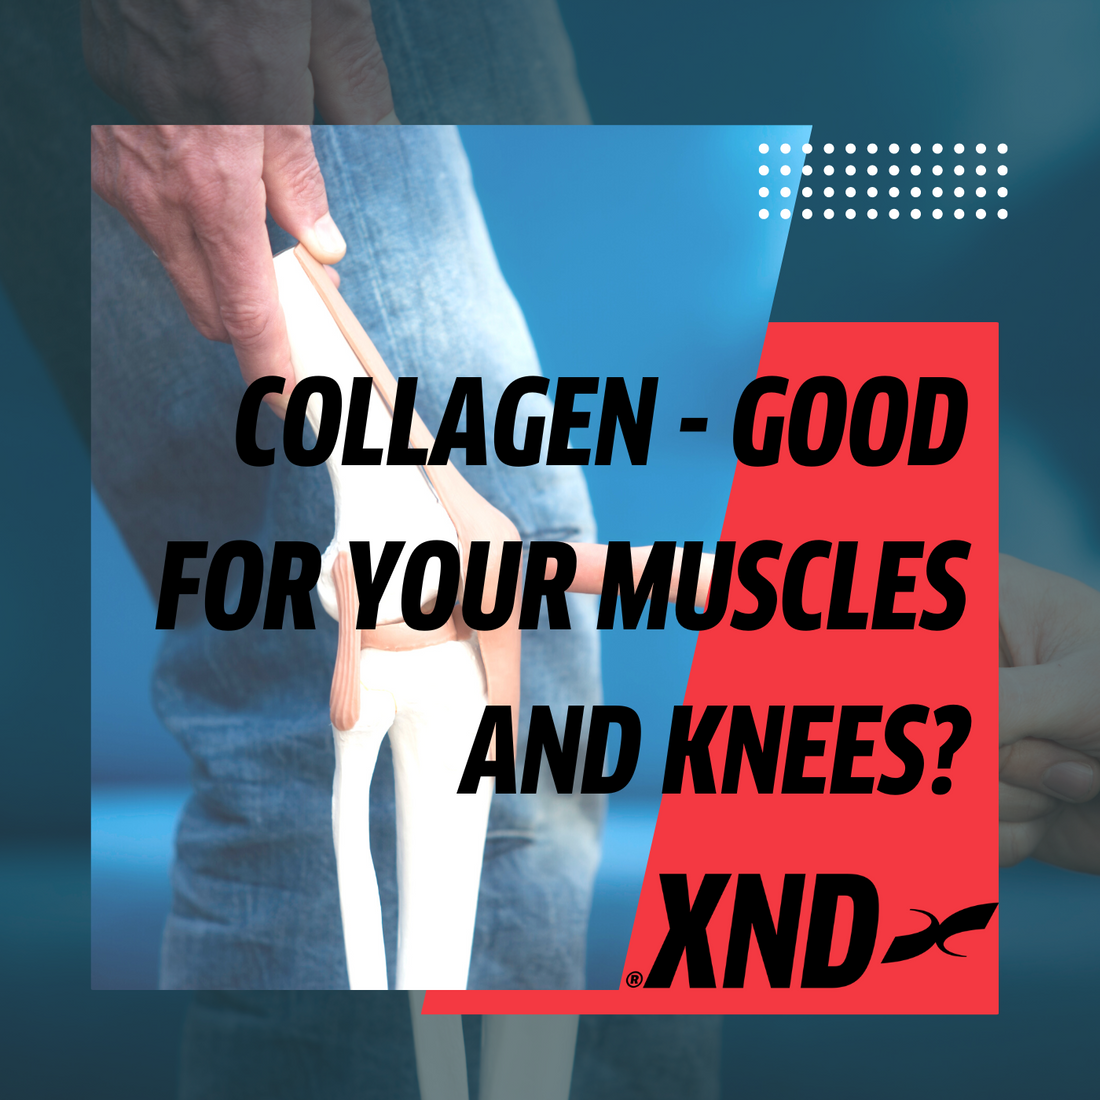 Collagen - good for your muscles and knees?